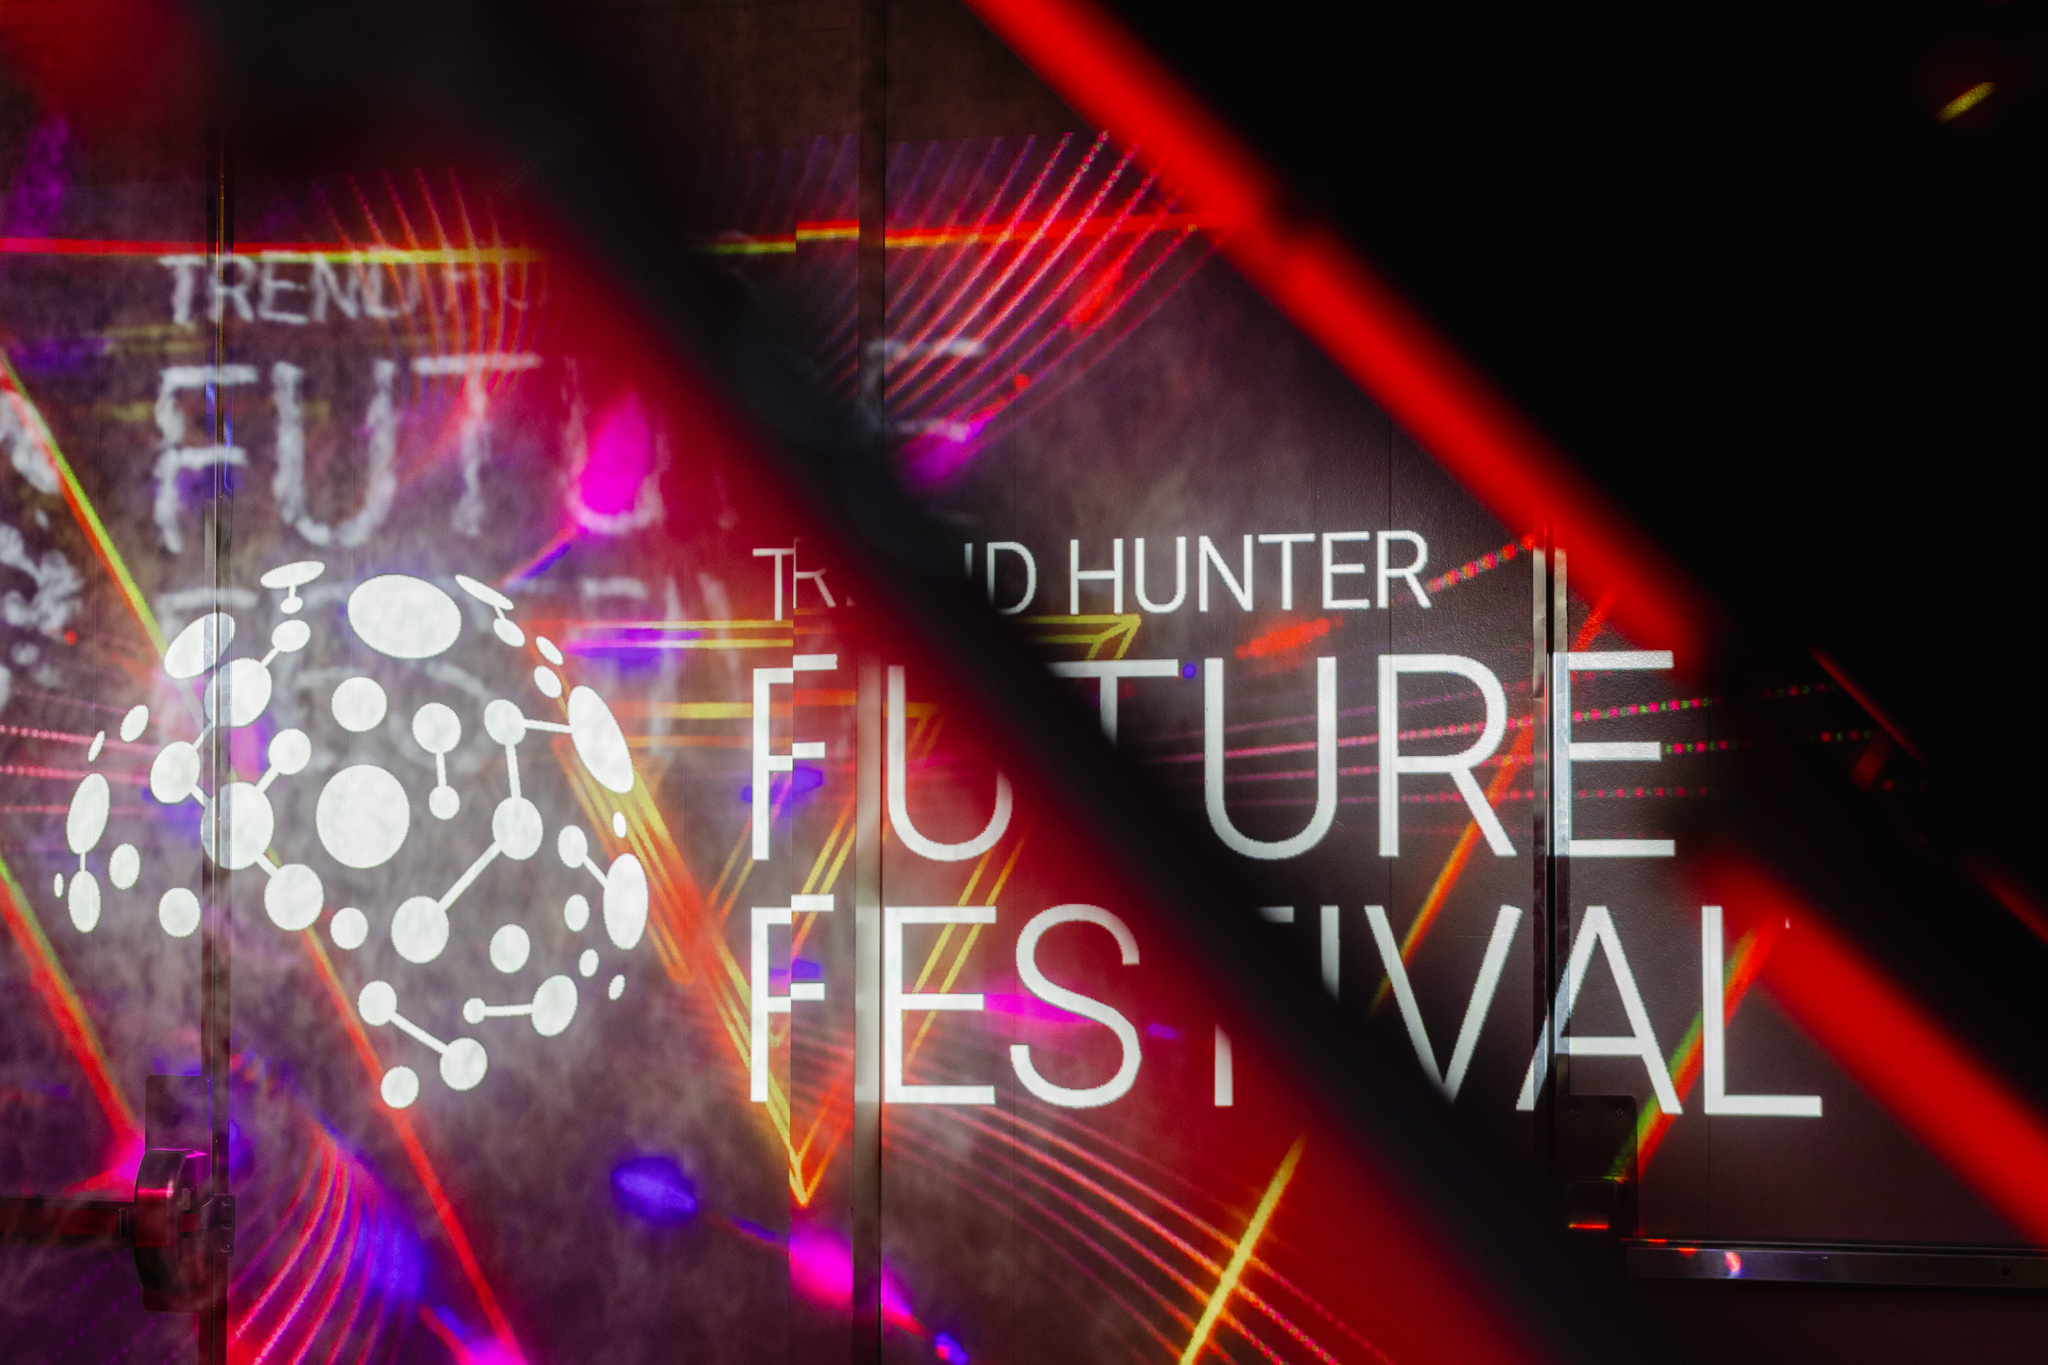 A neon sign advertising a future festival event.